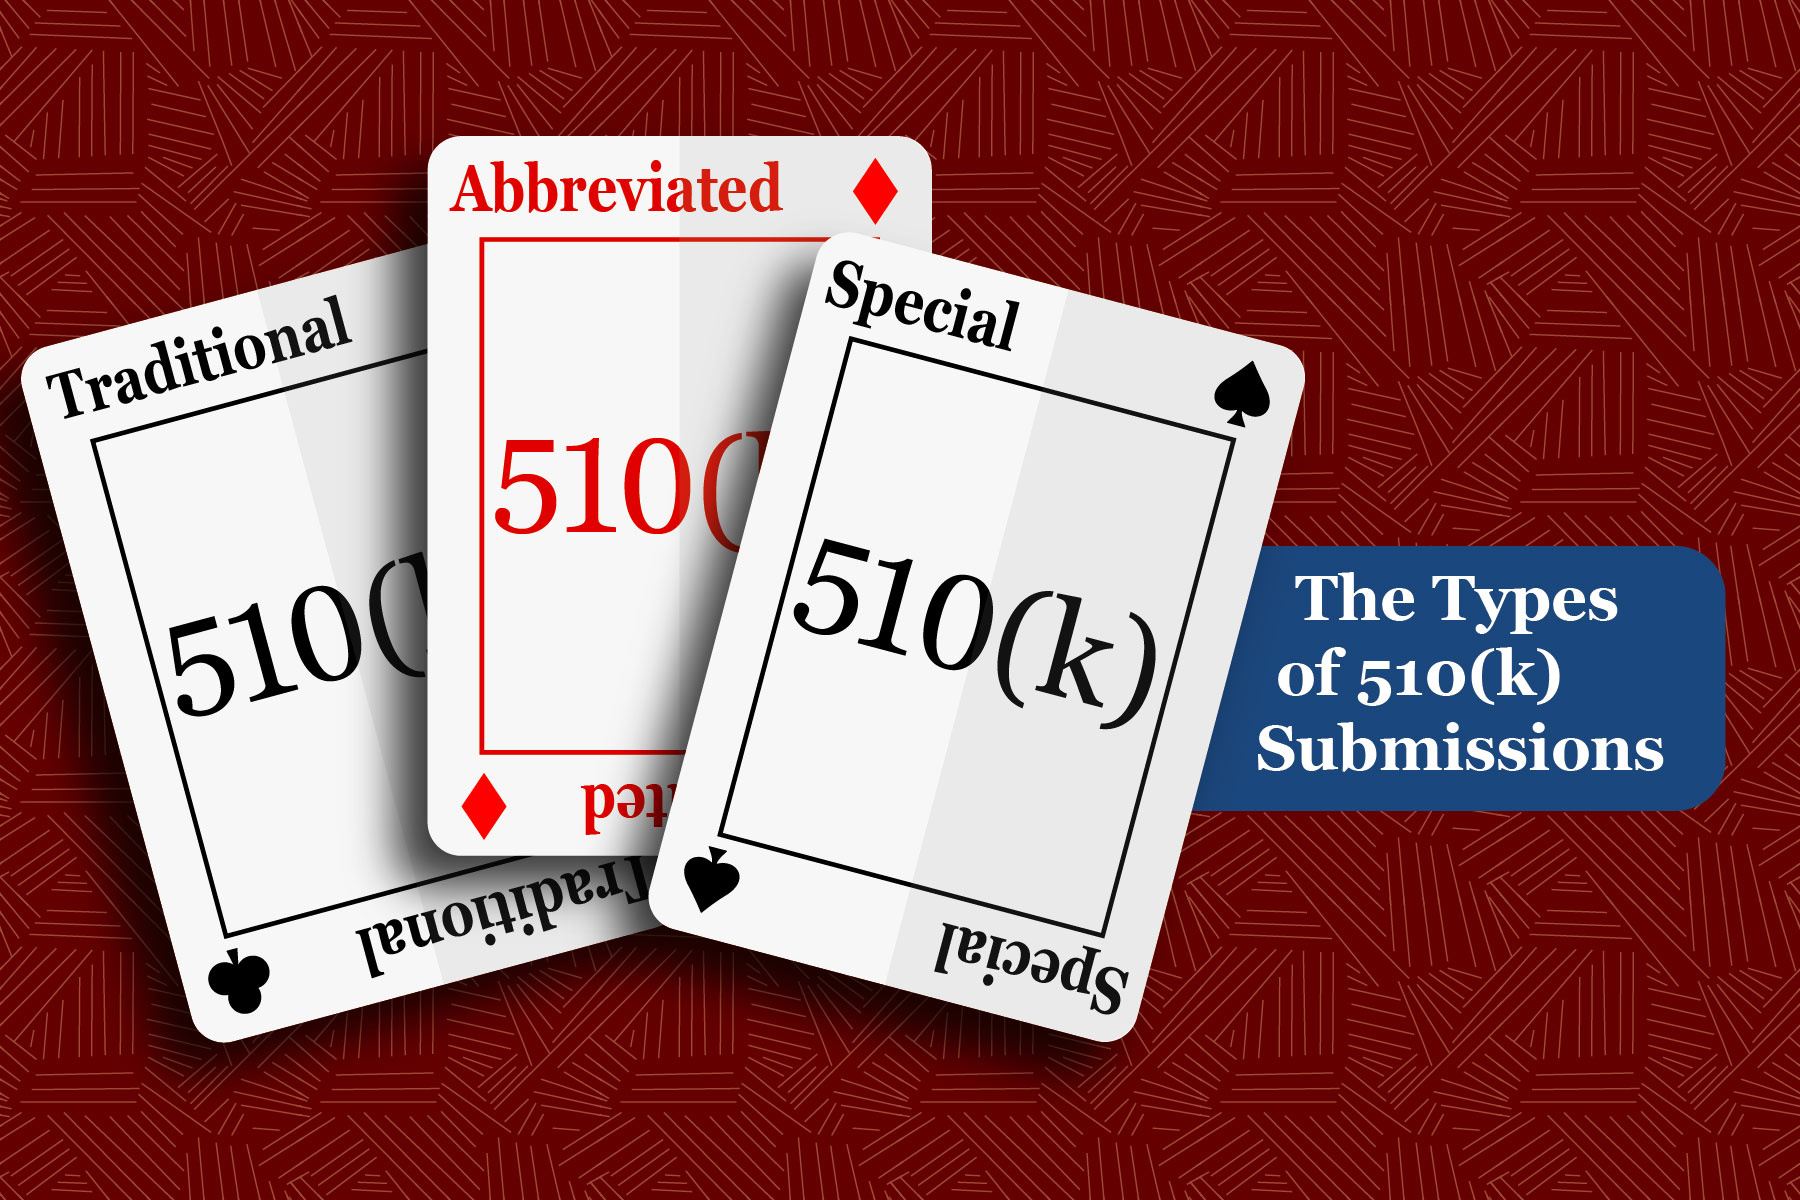 The Types of 510(k) Submissions